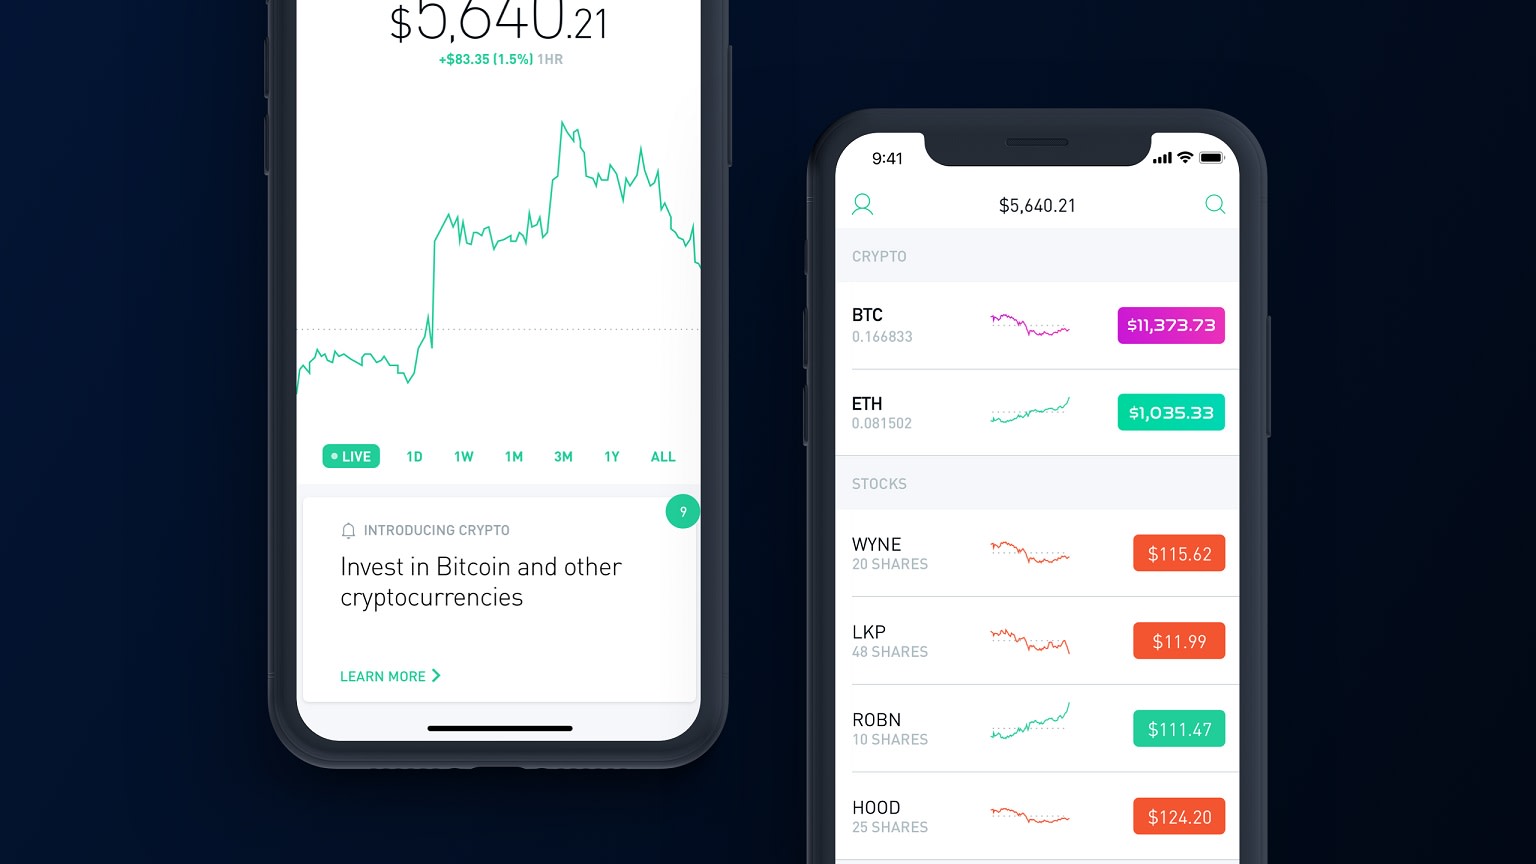 Robinhood will let users trade cryptocurrencies for free